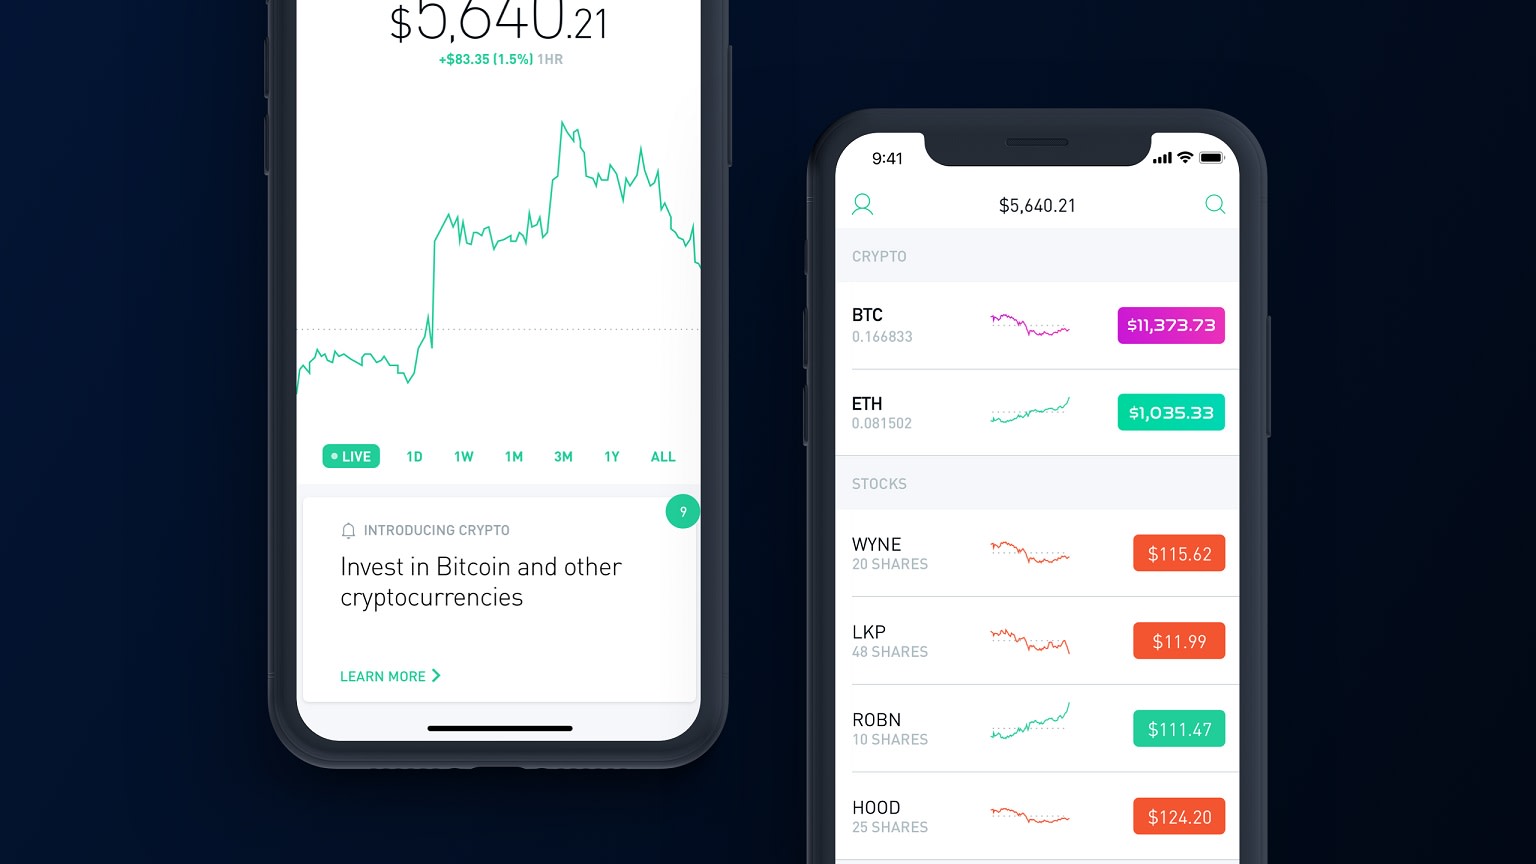 Robinhood will let users trade cryptocurrencies for free